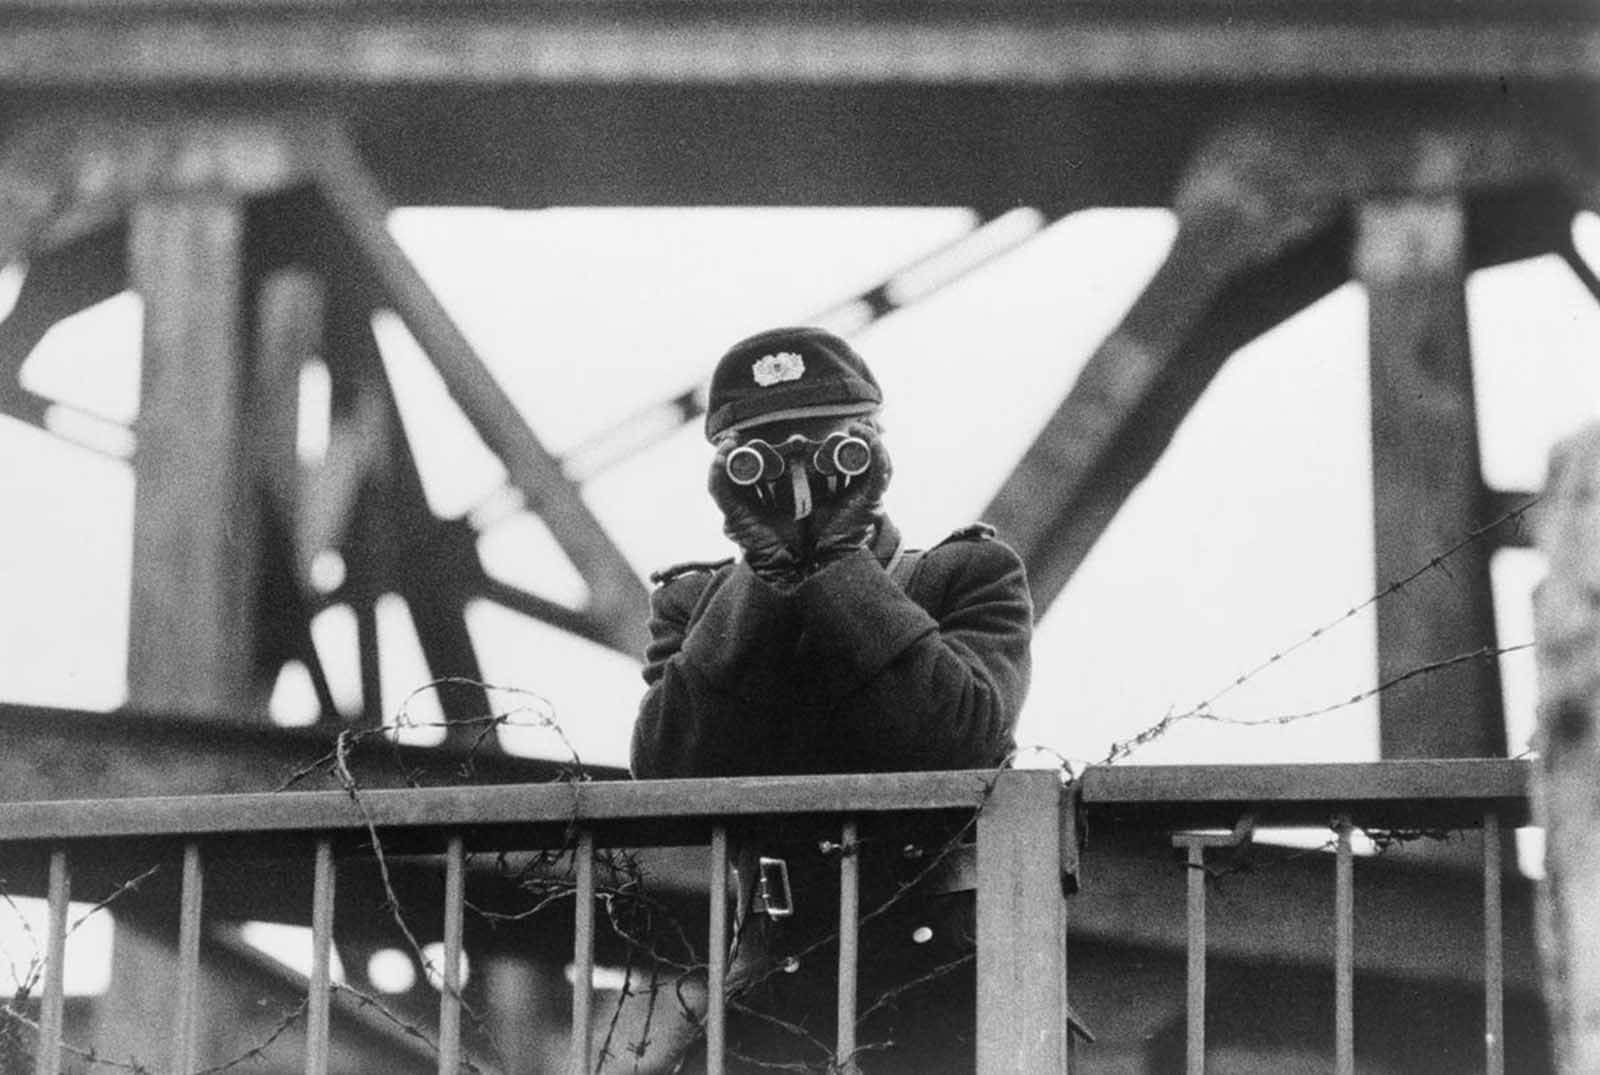 East German VOPO, a quasi-military border policeman using binoculars, standing guard on one of the bridges linking East and West Berlin, in 1961.